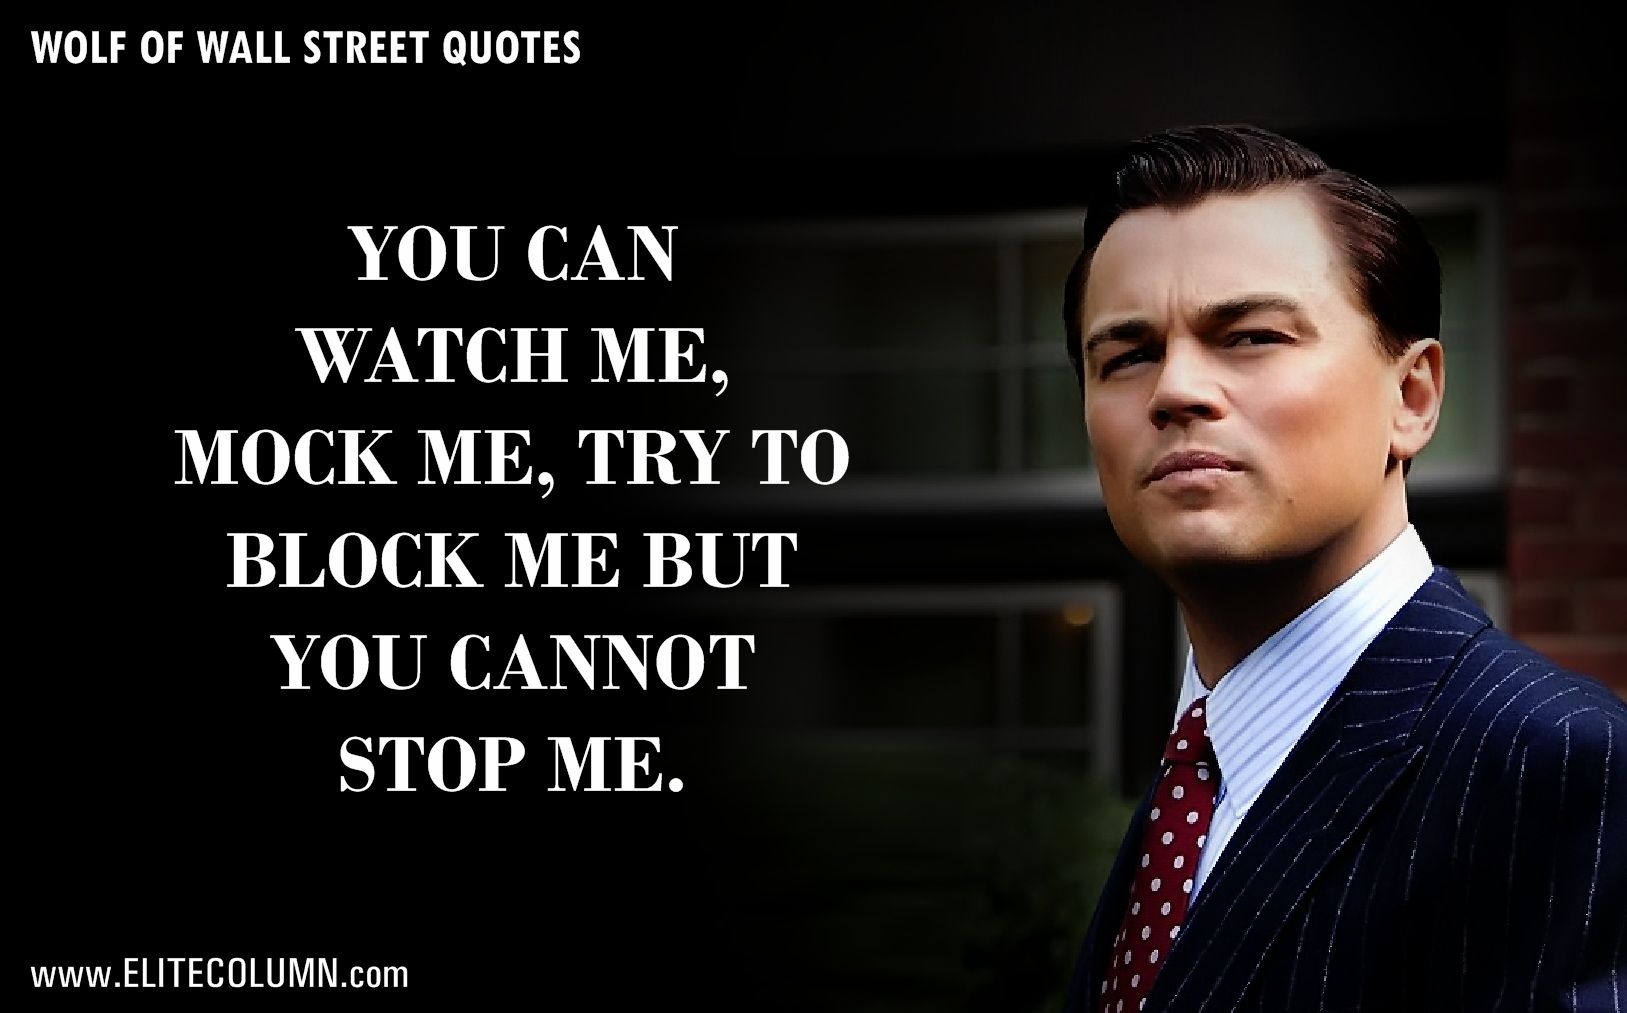 The Wolf of Wall Street Quotes That Will Make You Rich. EliteColumn. Street quotes, Wolf of wall street, Leonardo dicaprio quotes